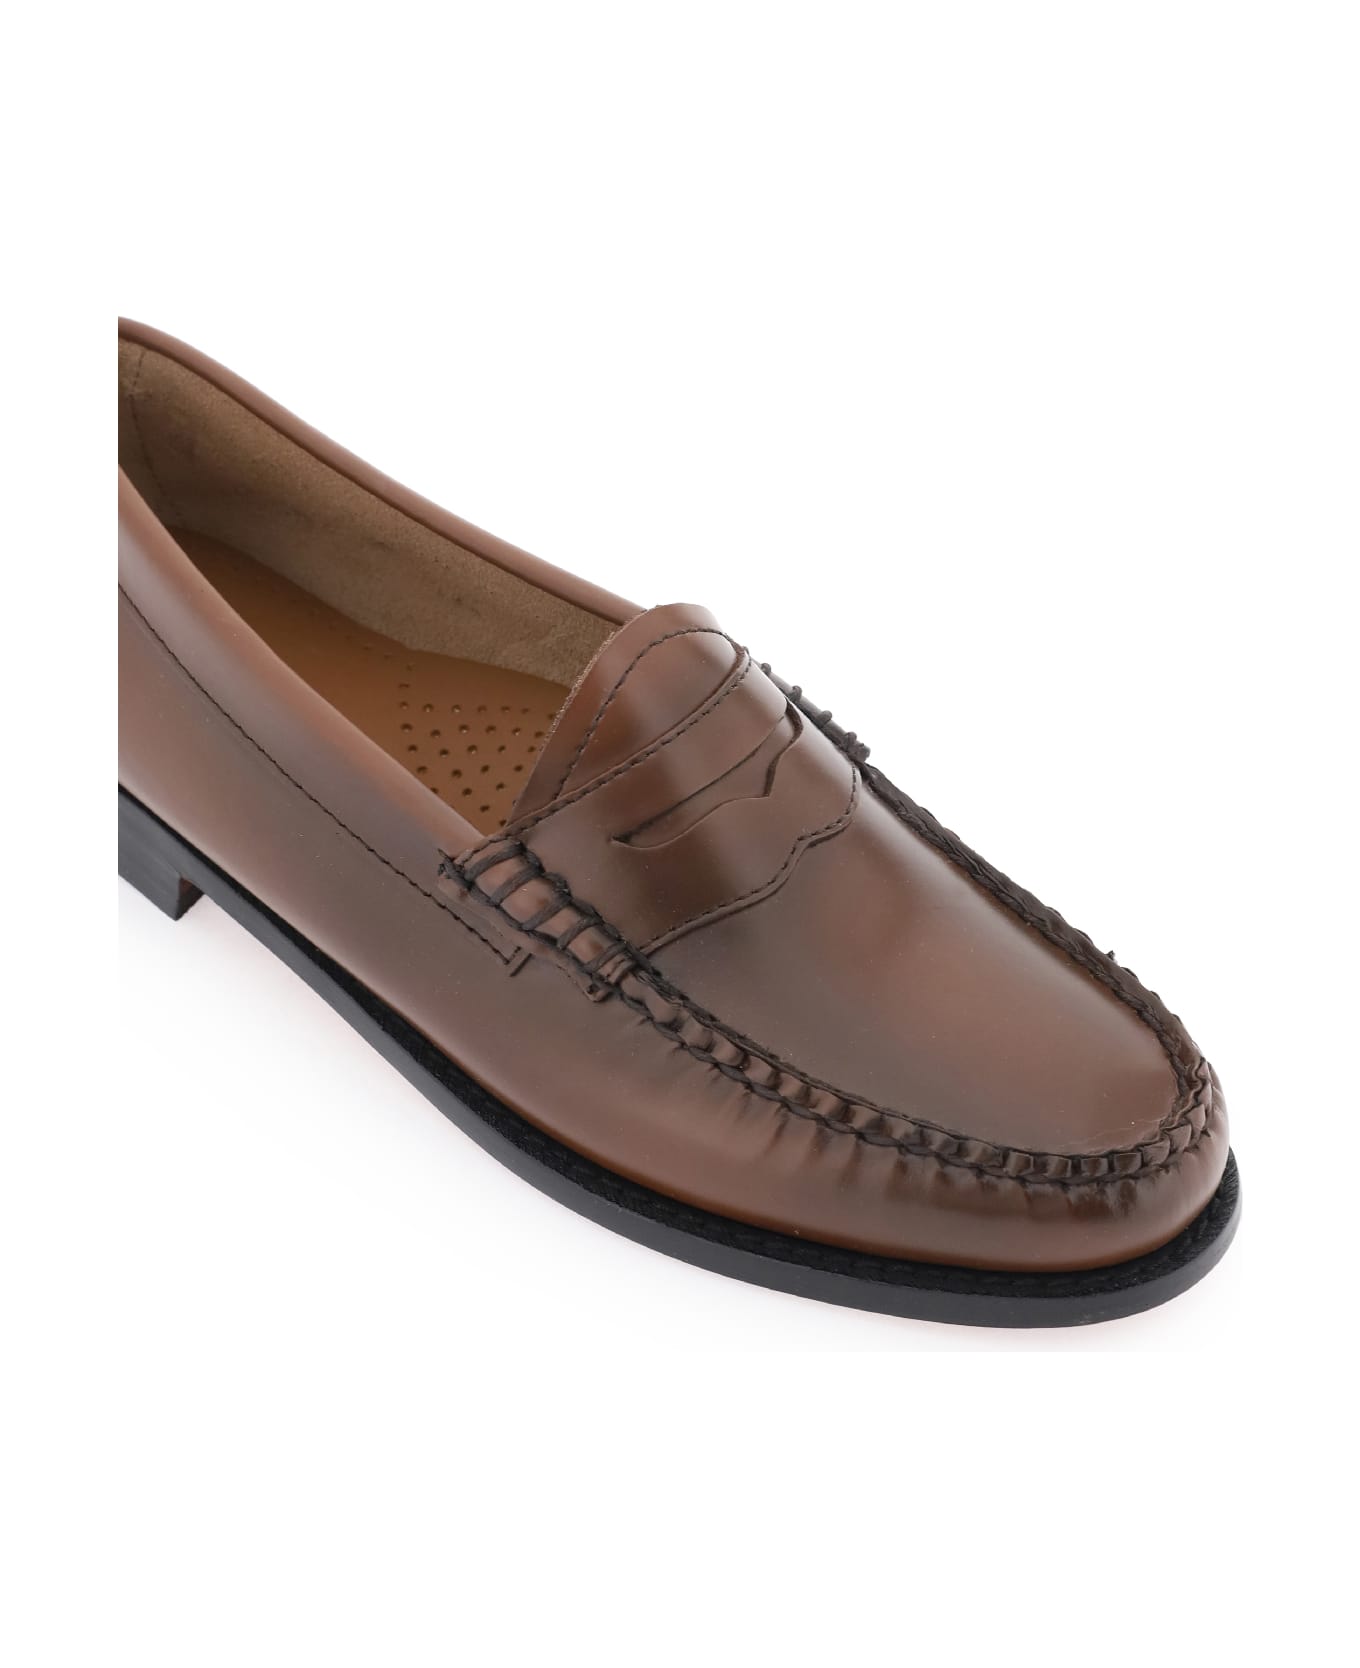 G.H.Bass & Co. Weejuns Penny Loafers - COGNAC (Brown)